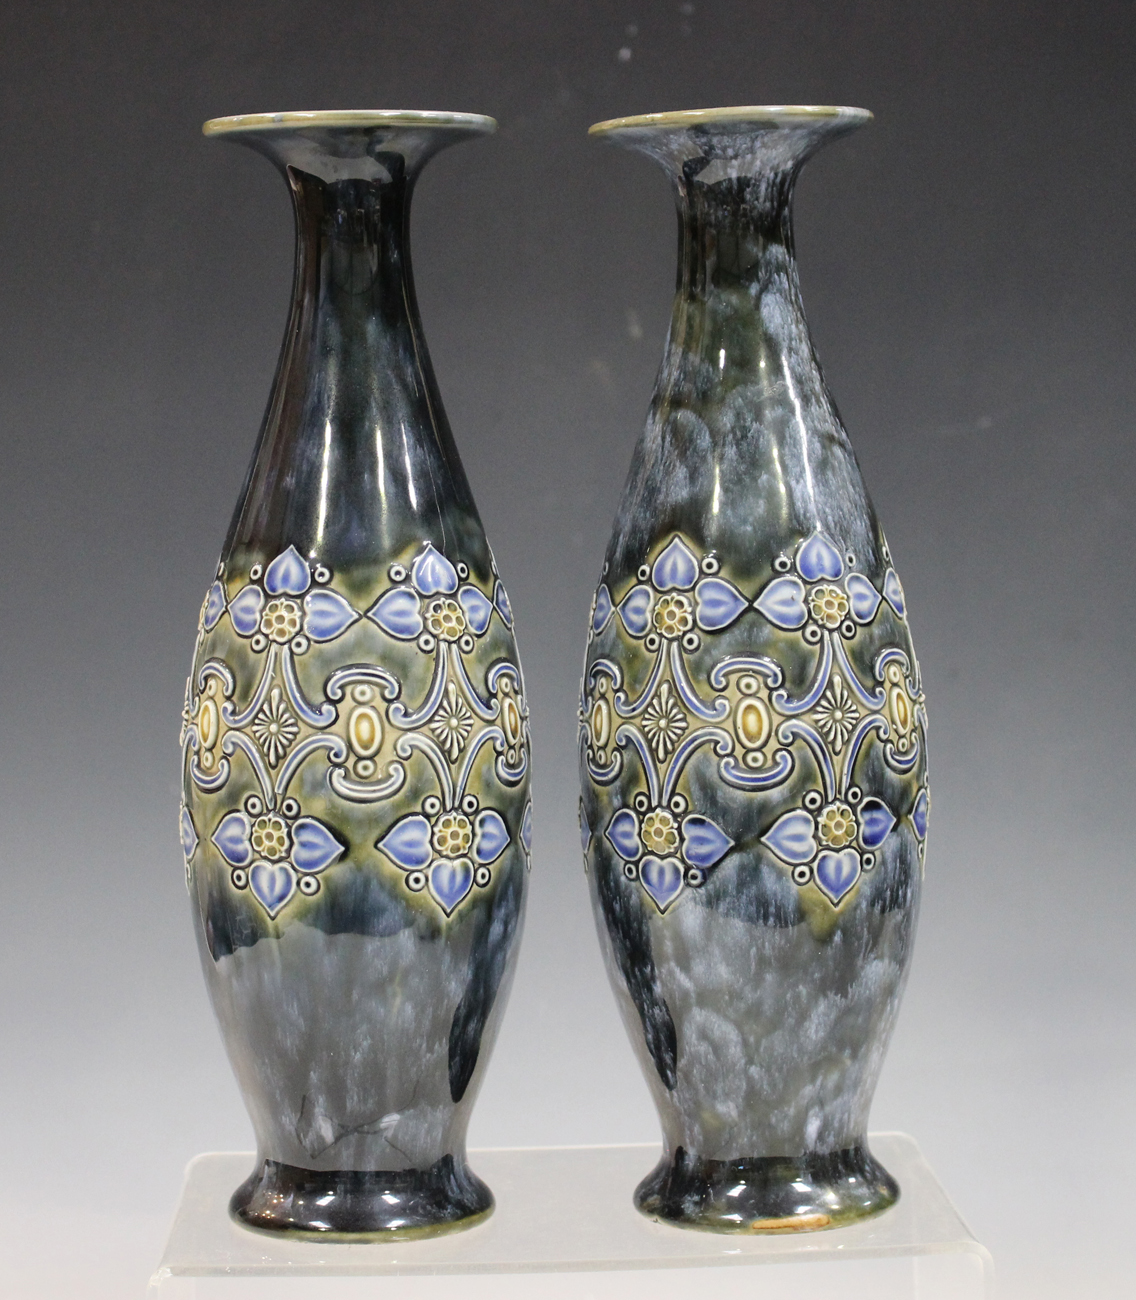 A pair of Royal Doulton stoneware vases, early 20th century, the mottled green/blue glazed bodies